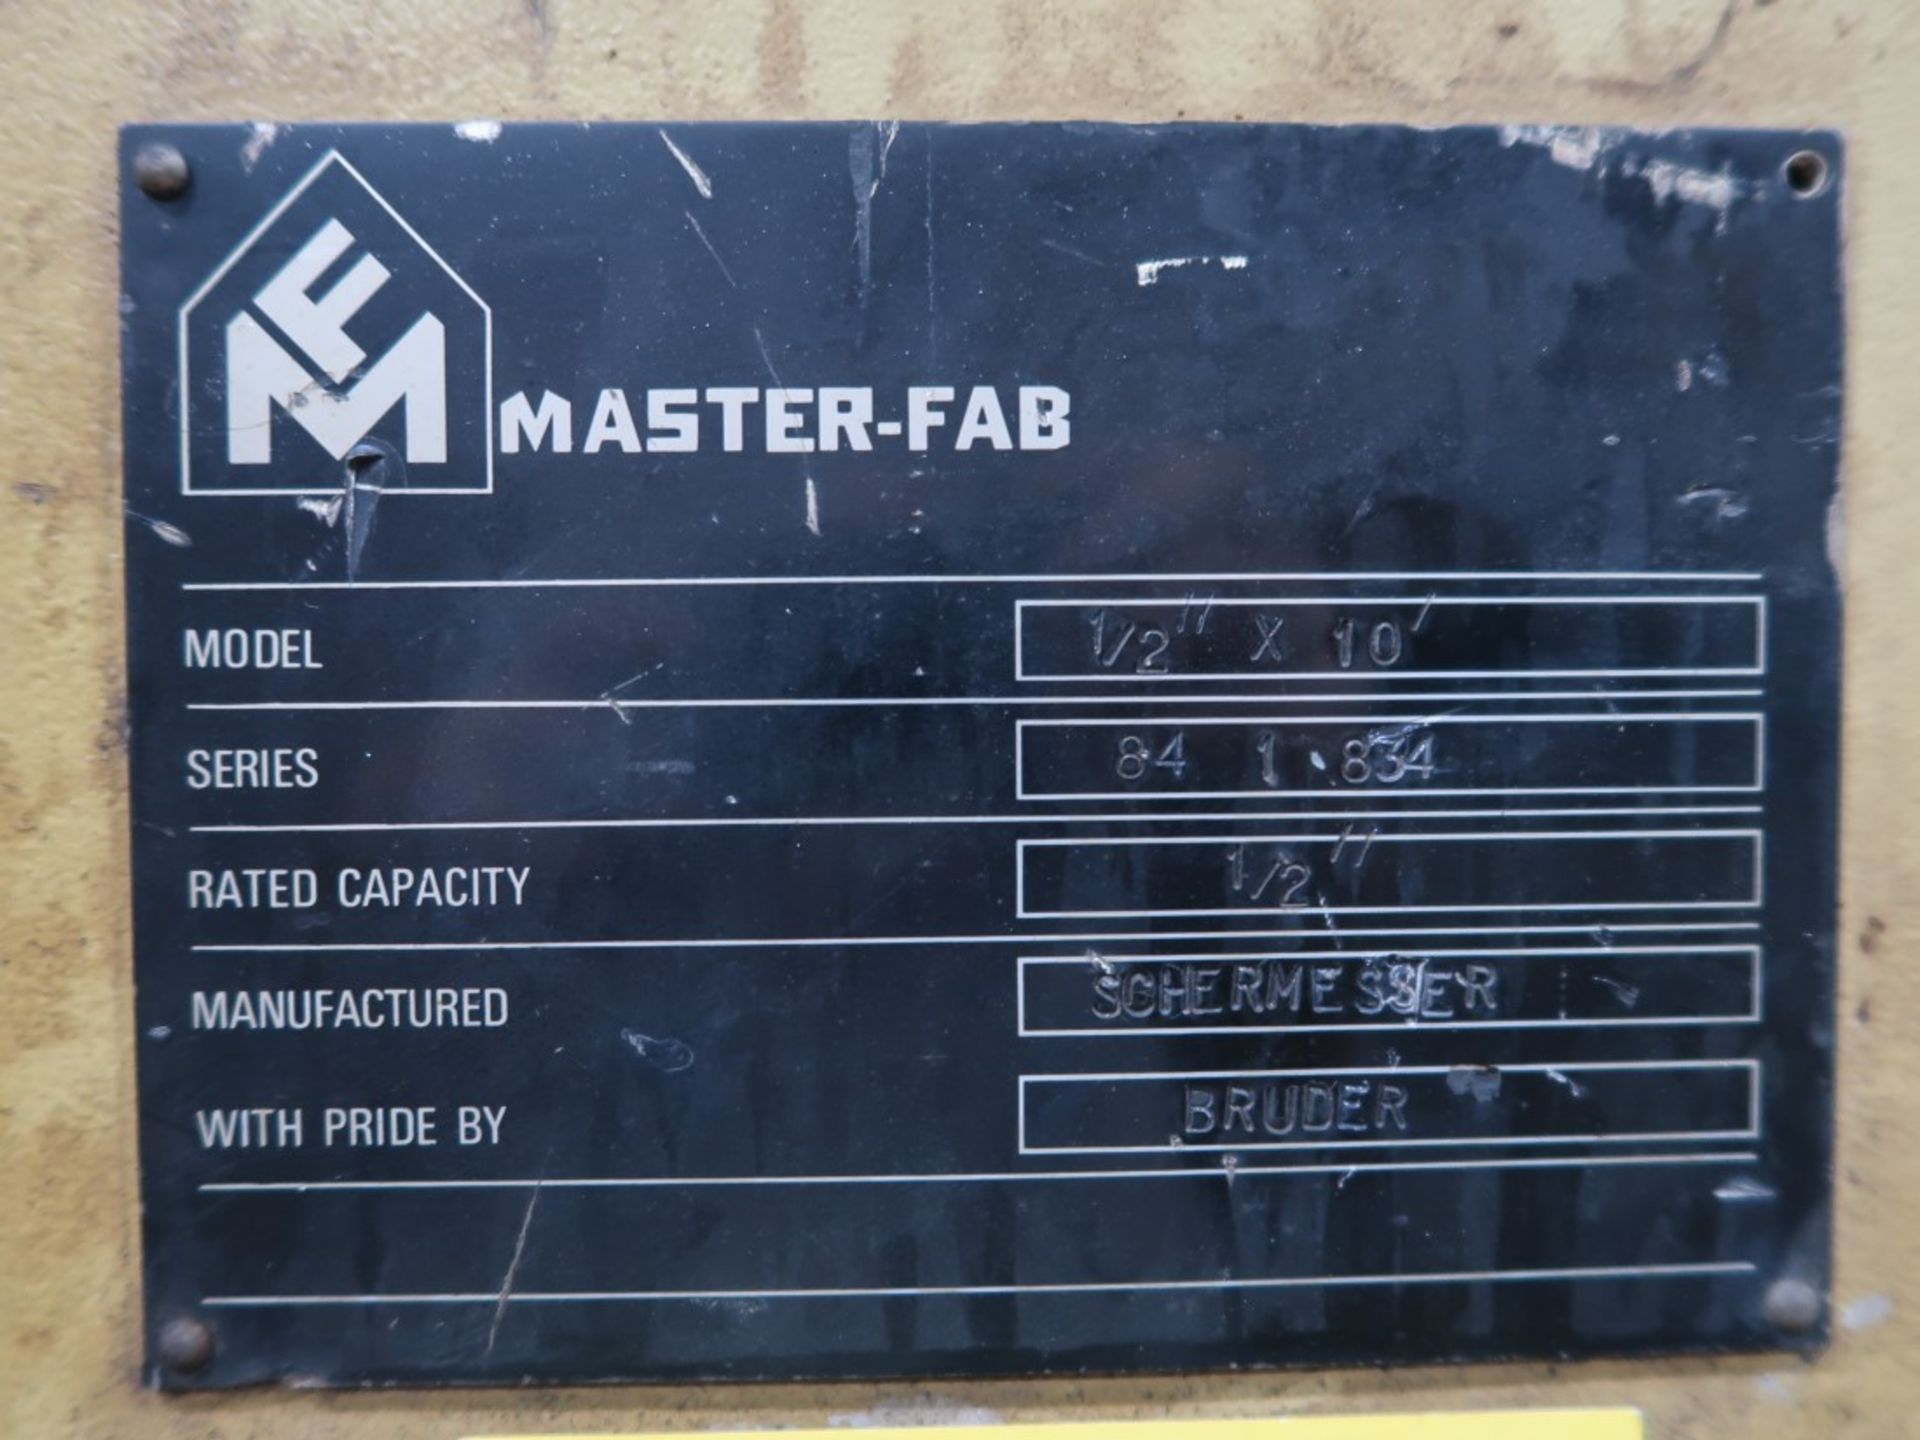 Master Fab Series 84 Model #1/2" x 10' Left Arm Power Squaring Shear, Rated Cap 1/2" - Image 7 of 7